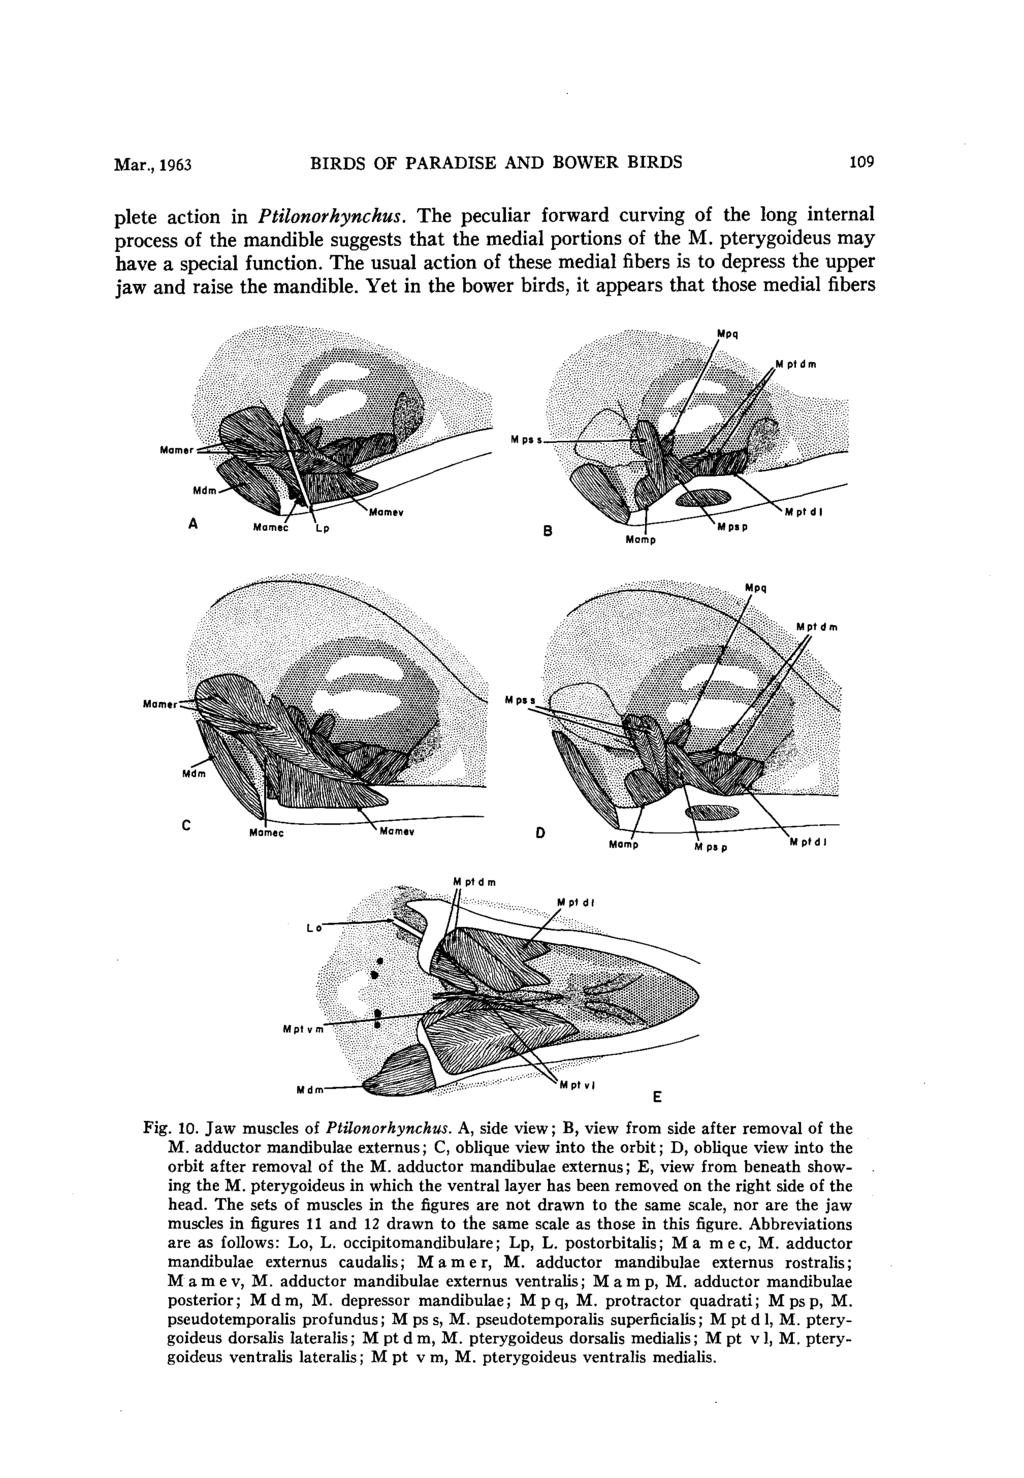 Mar., 1963 BIRDS OF PARADISE AND BOWER BIRDS 109 plete action in Ptilonorhynchus. The peculiar forward curving of the long internal process of the mandible suggests that the medial portions of the M.